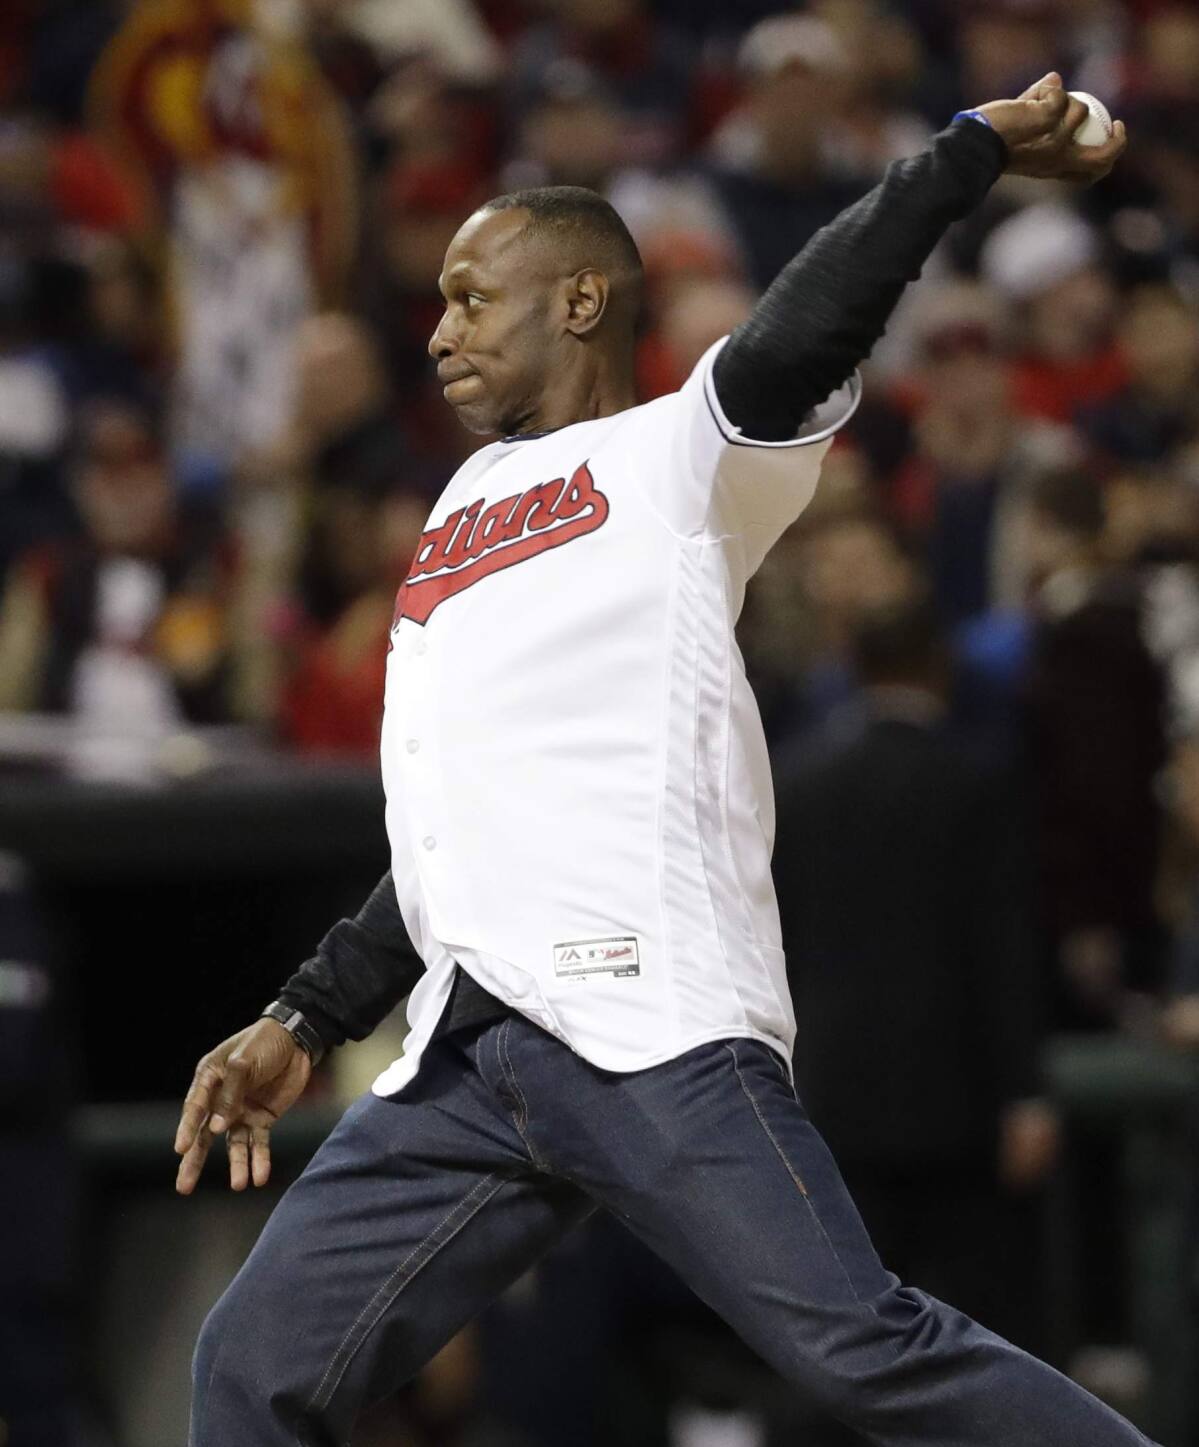 Indians fan gives up plane seat so Kenny Lofton could make it to